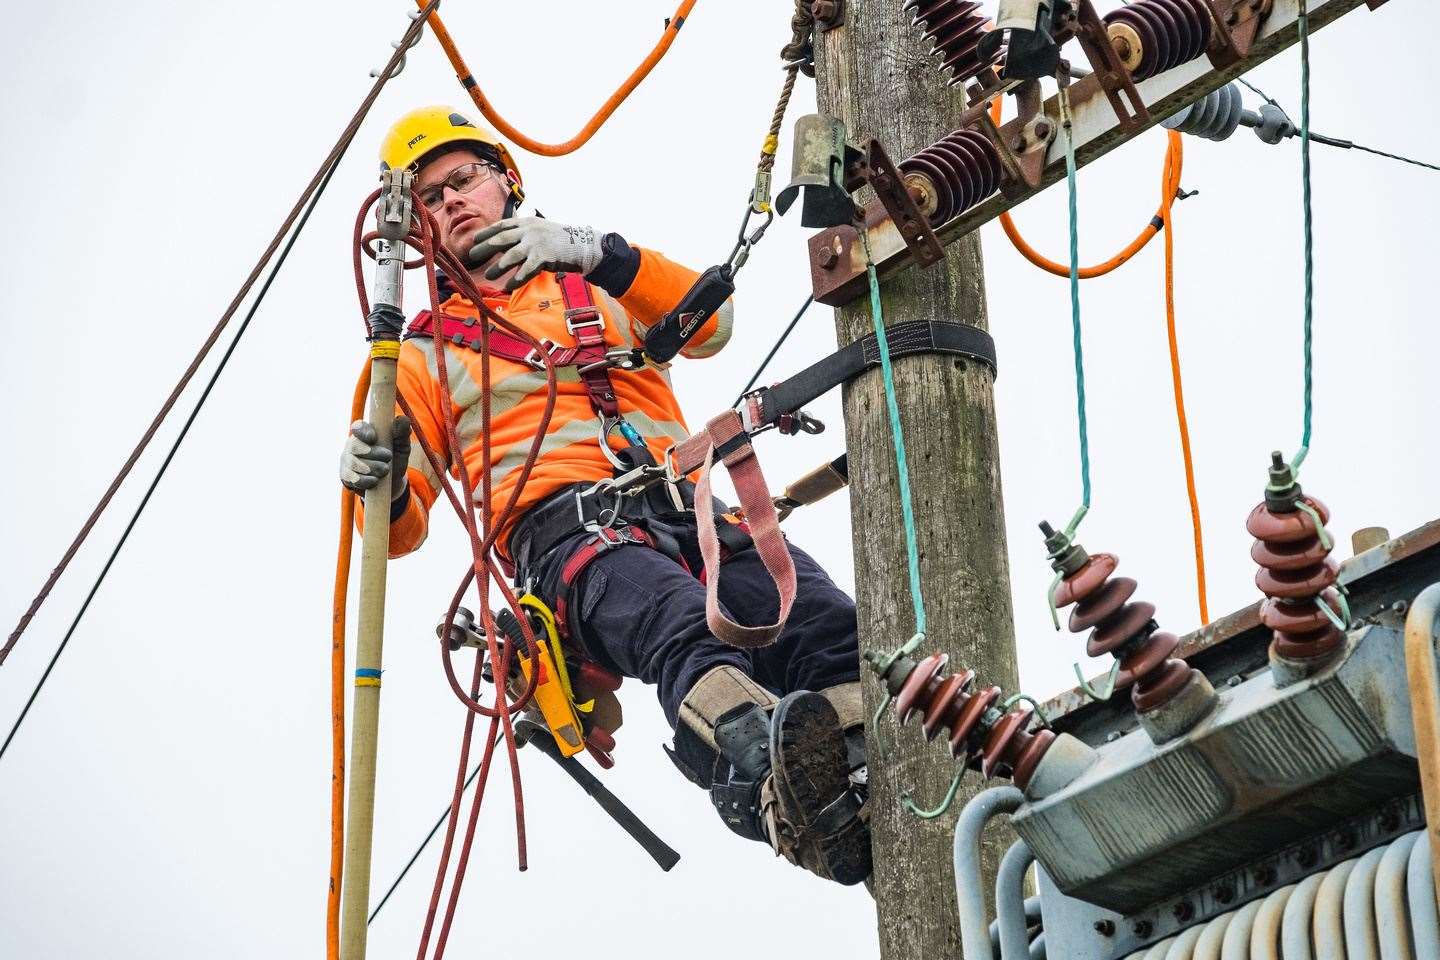 SSEN staff are tackling significant damage to the power network. Picture: SSEN